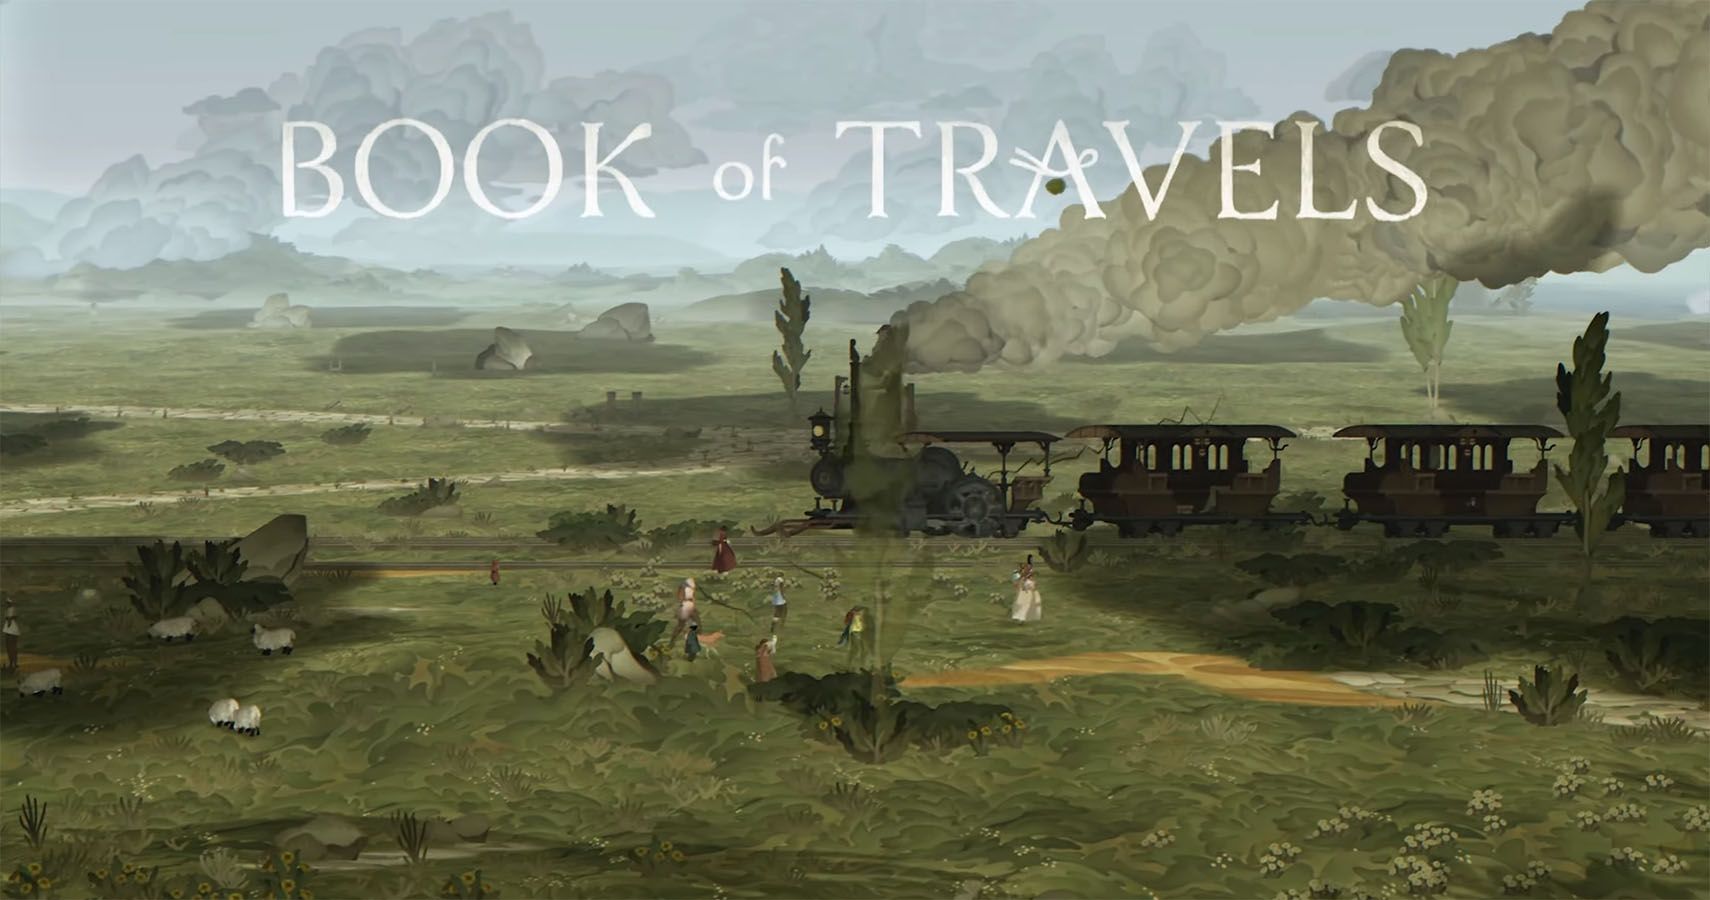 the book of travels summary shmoop